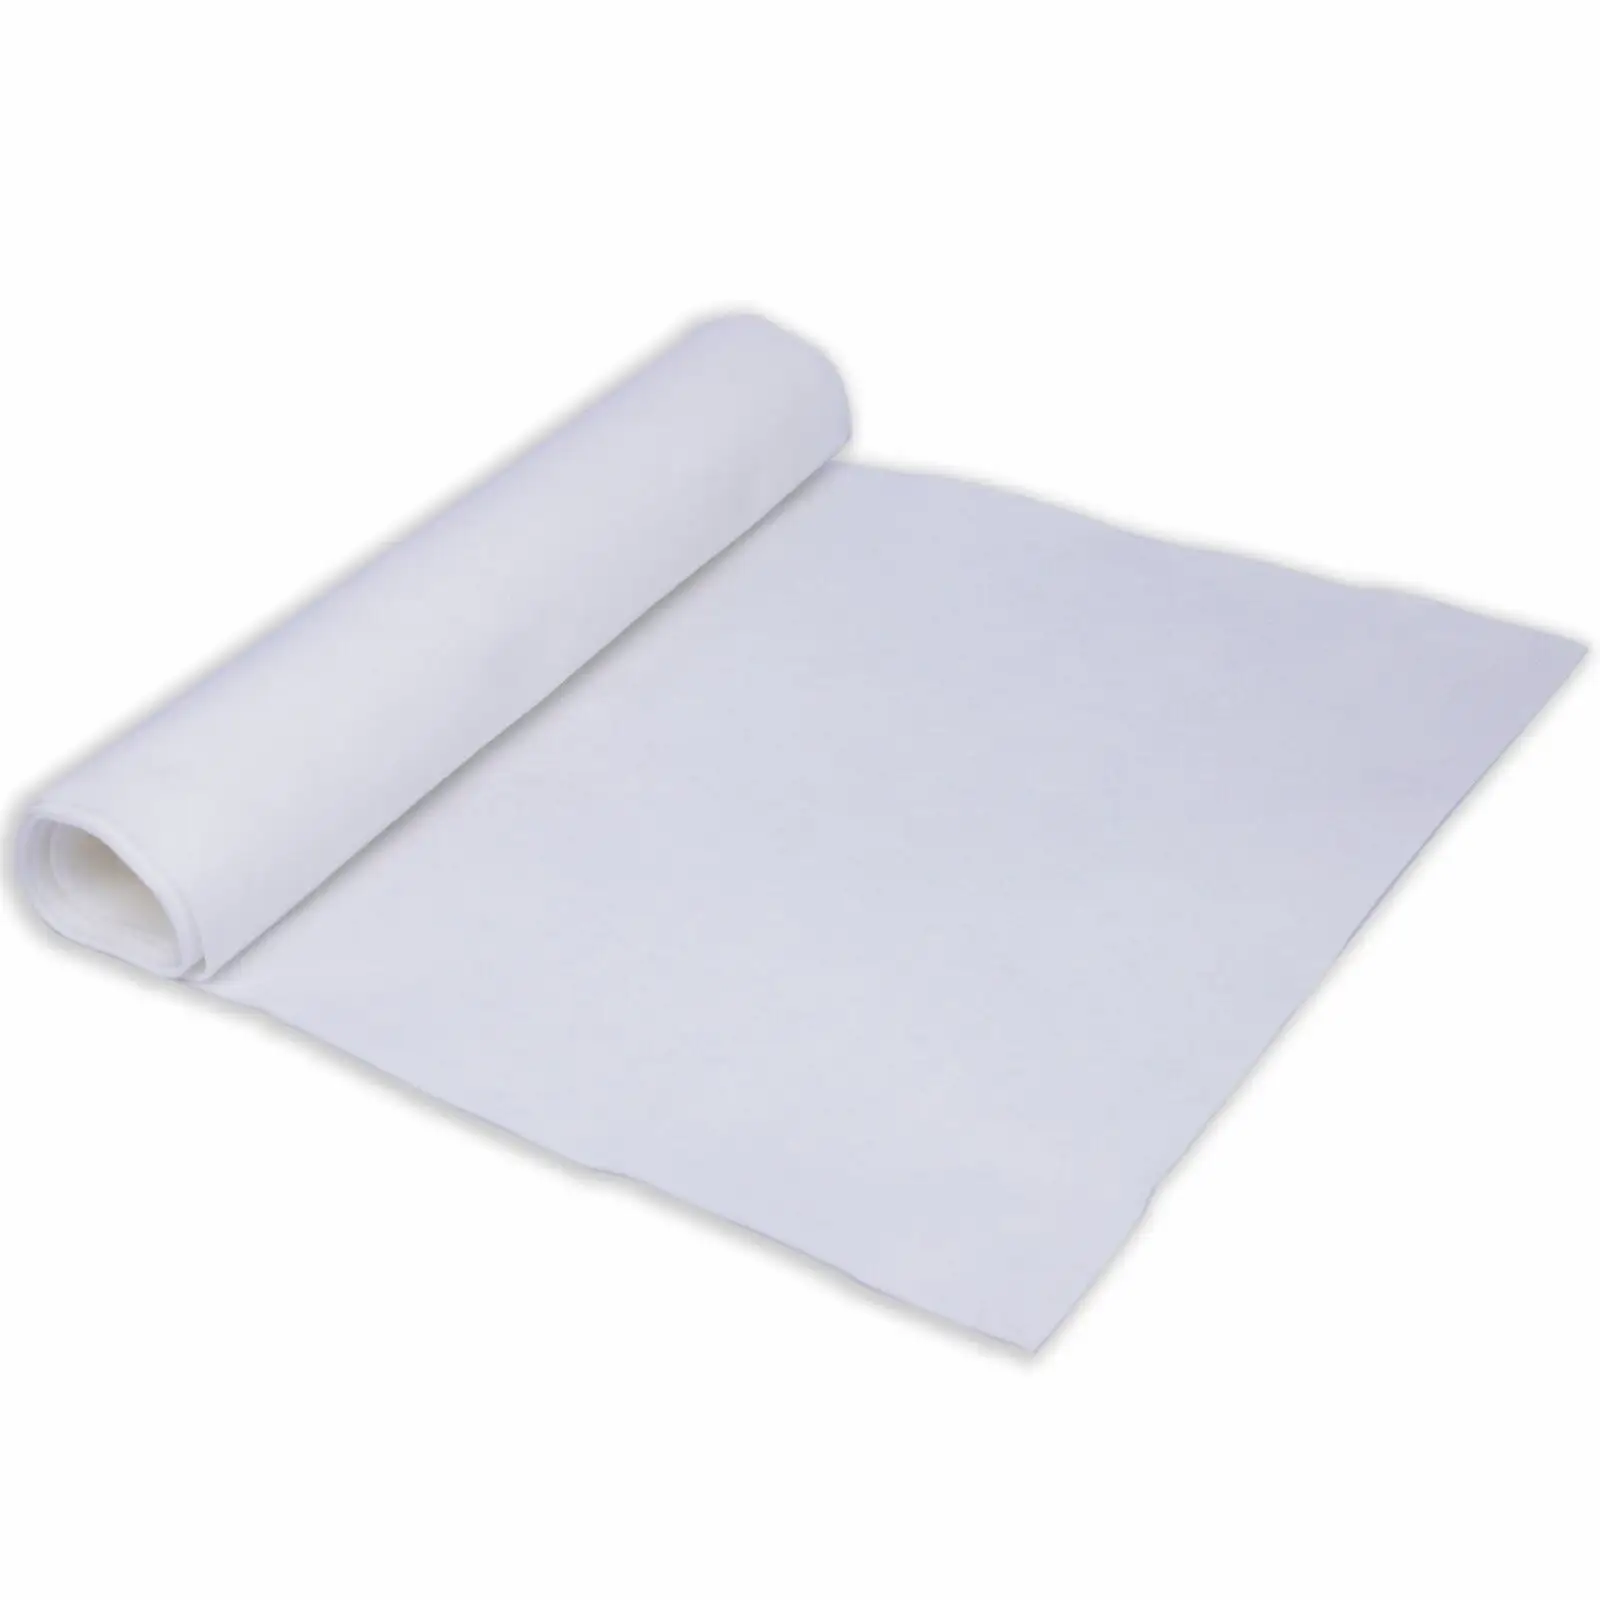 Recycled 1 to 5mm thickness nonwoven fabric felt sheet needle punched polyester craft felt